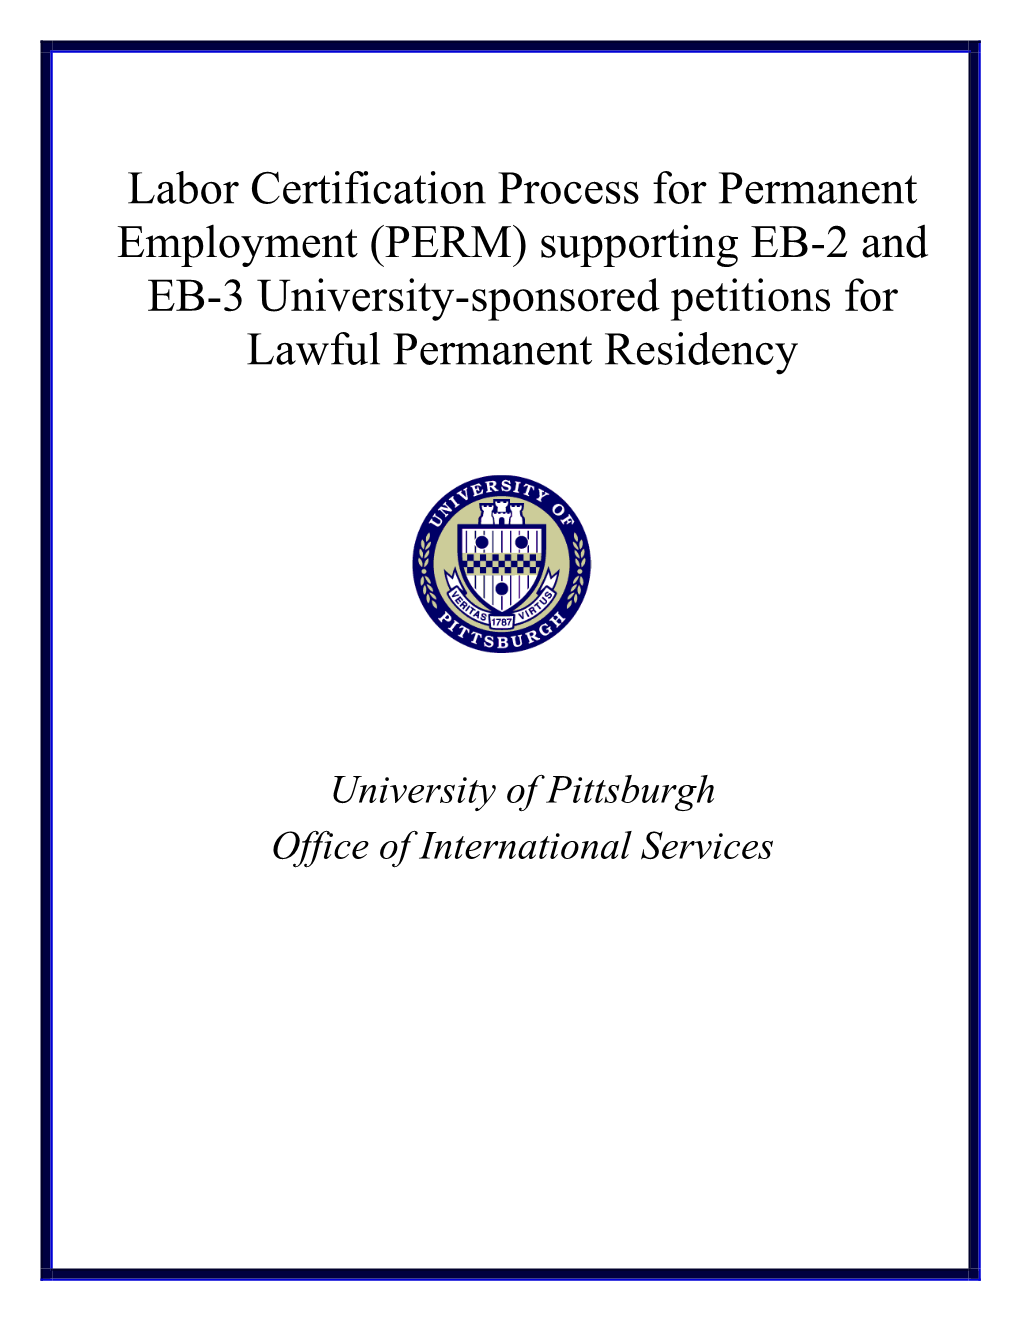 Labor Certification Process for Permanent Employment (PERM) Supporting EB-2 and EB-3 University-Sponsored Petitions for Lawful Permanent Residency